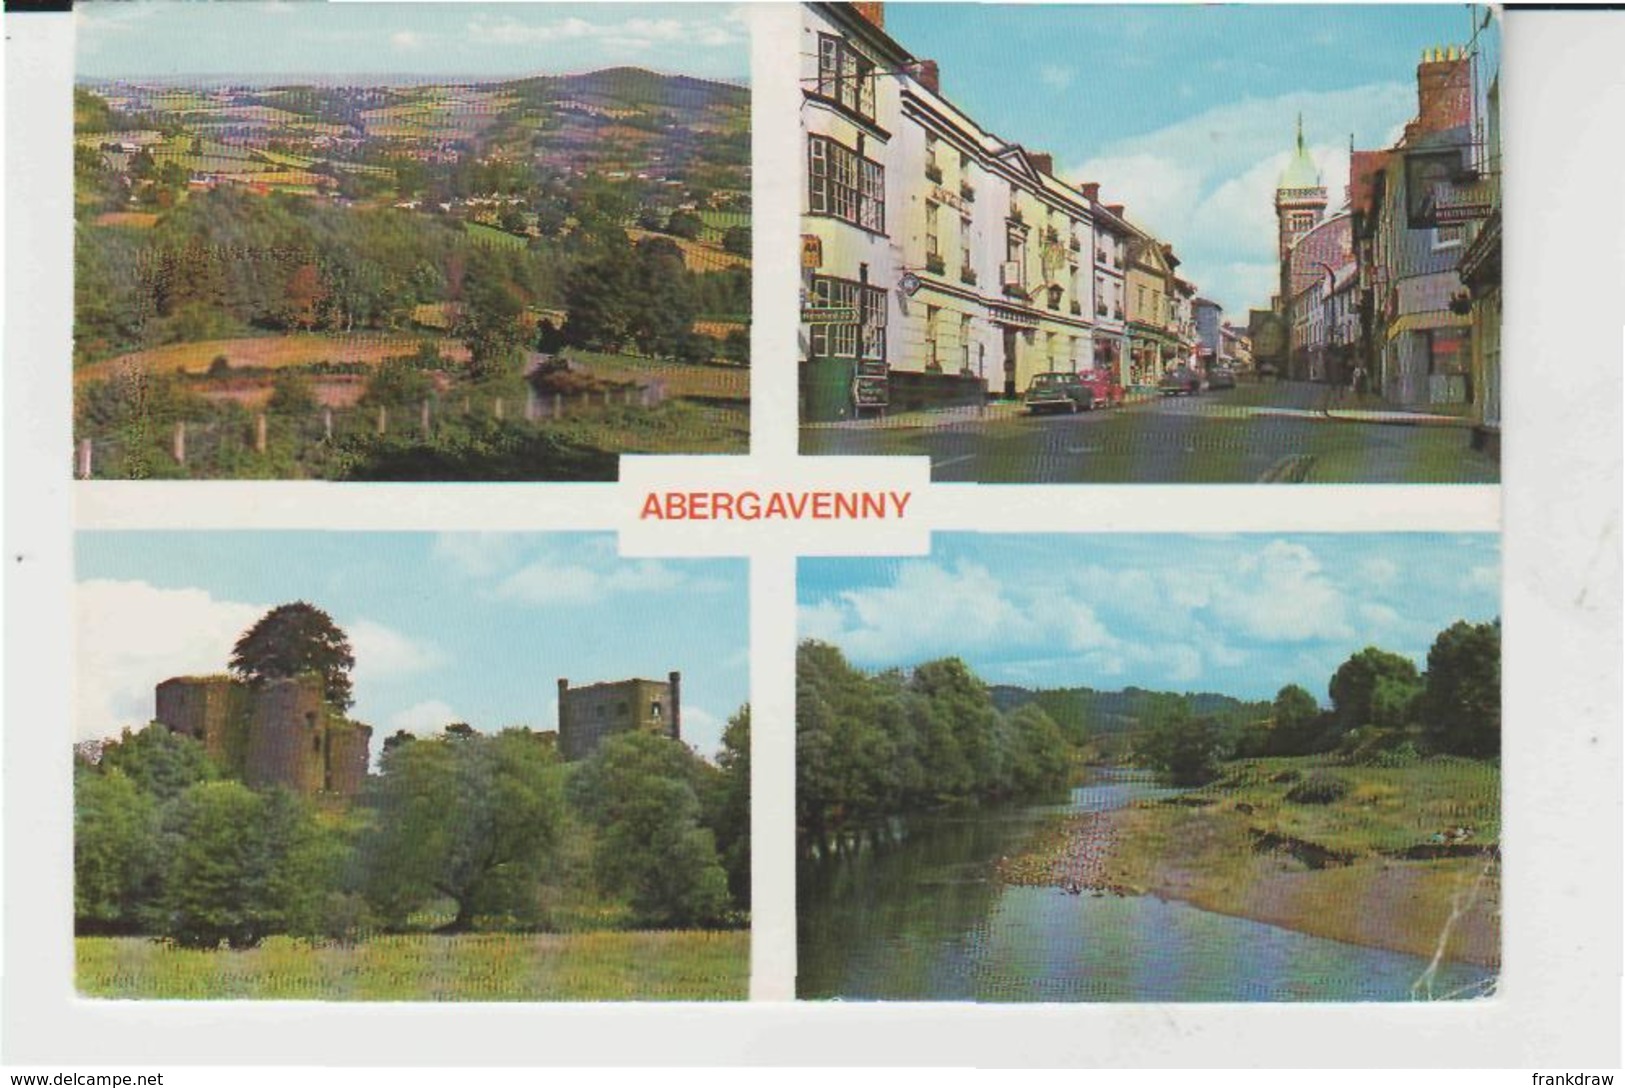 Postcard - Abergavenny Four Views, Card No..c2915 - Posted Sept 1981 Very Good - Unclassified